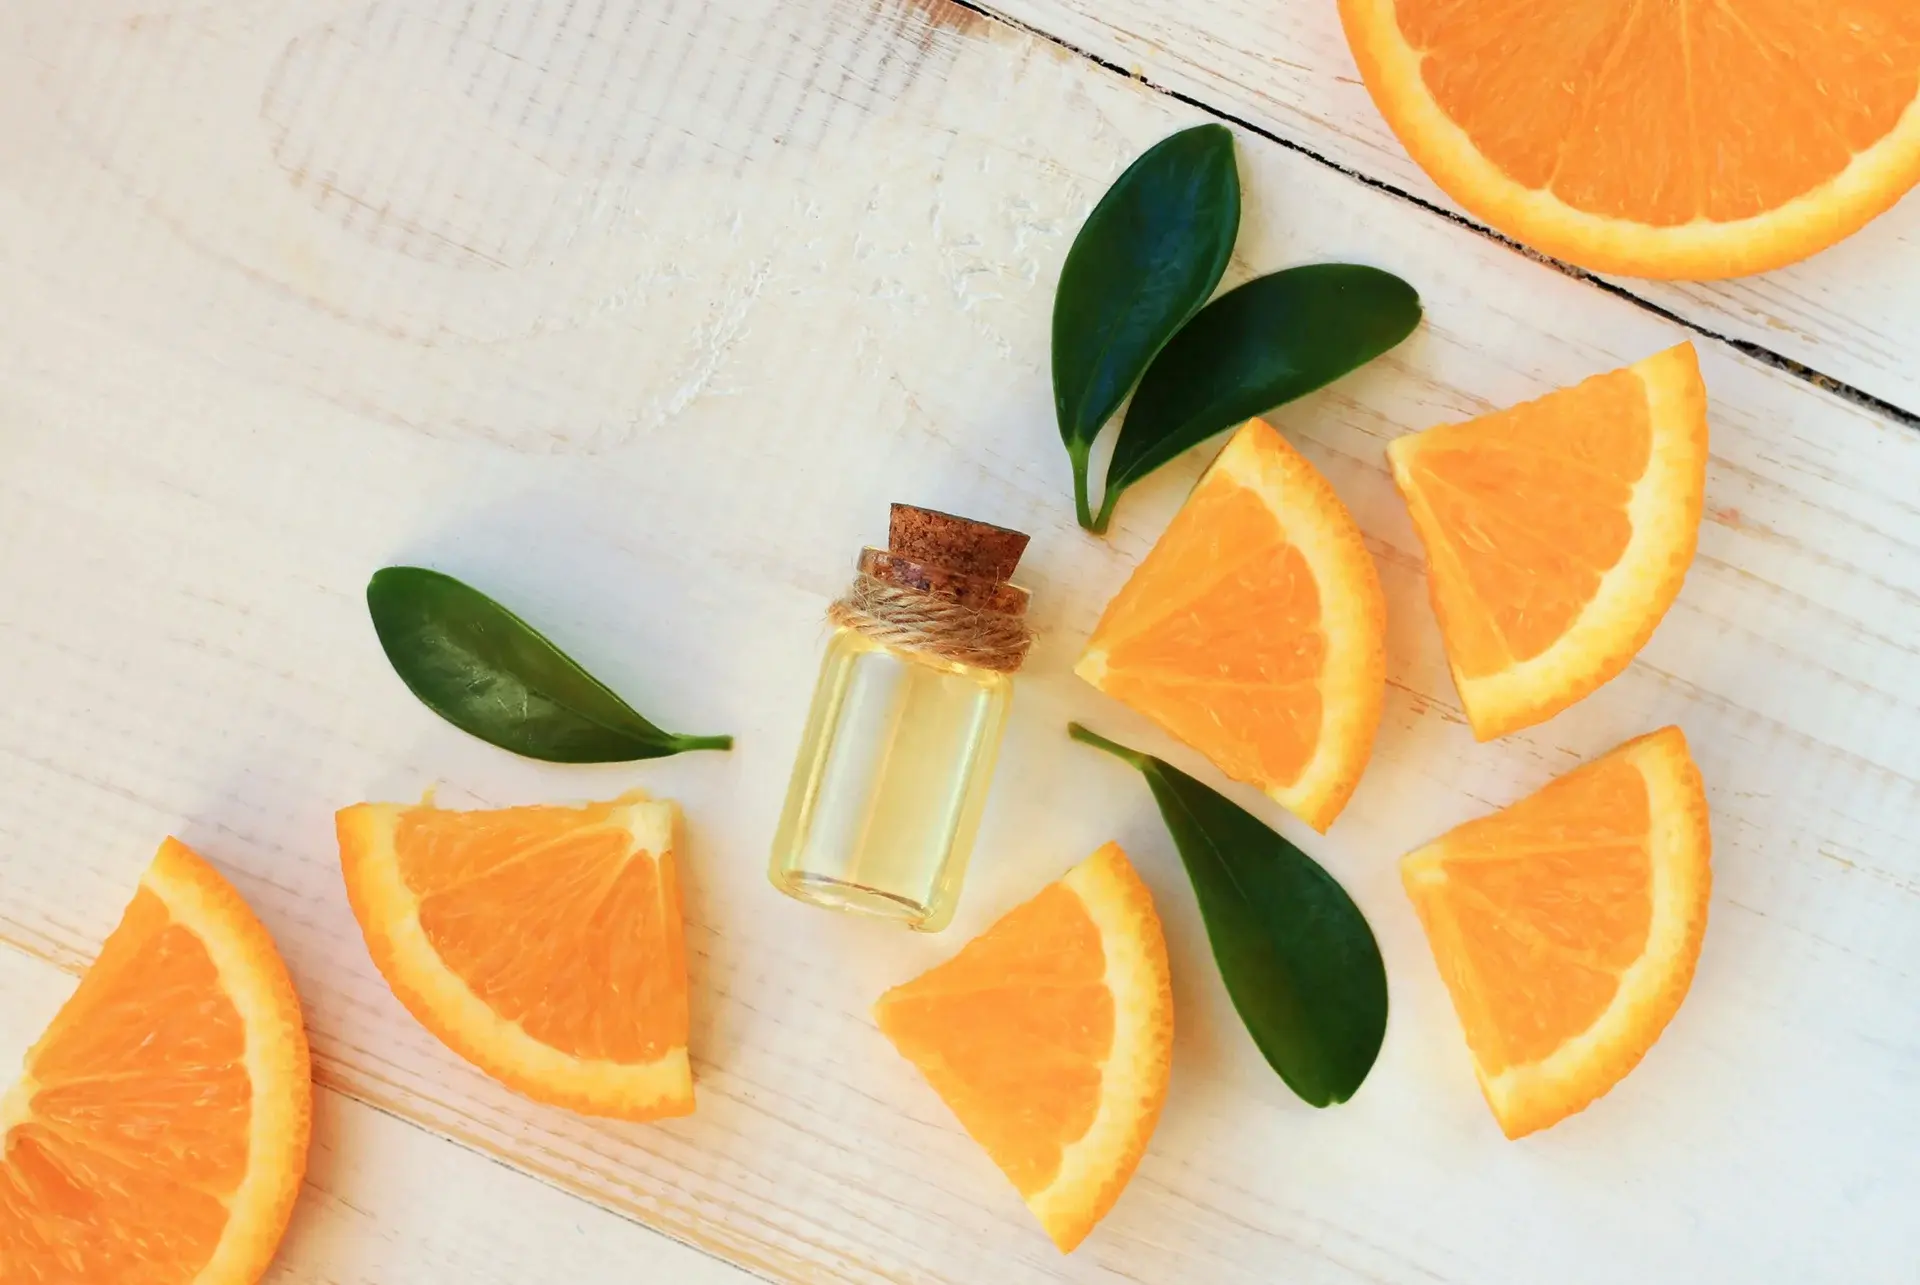 A bottle of essential oil and orange slices on a white background.